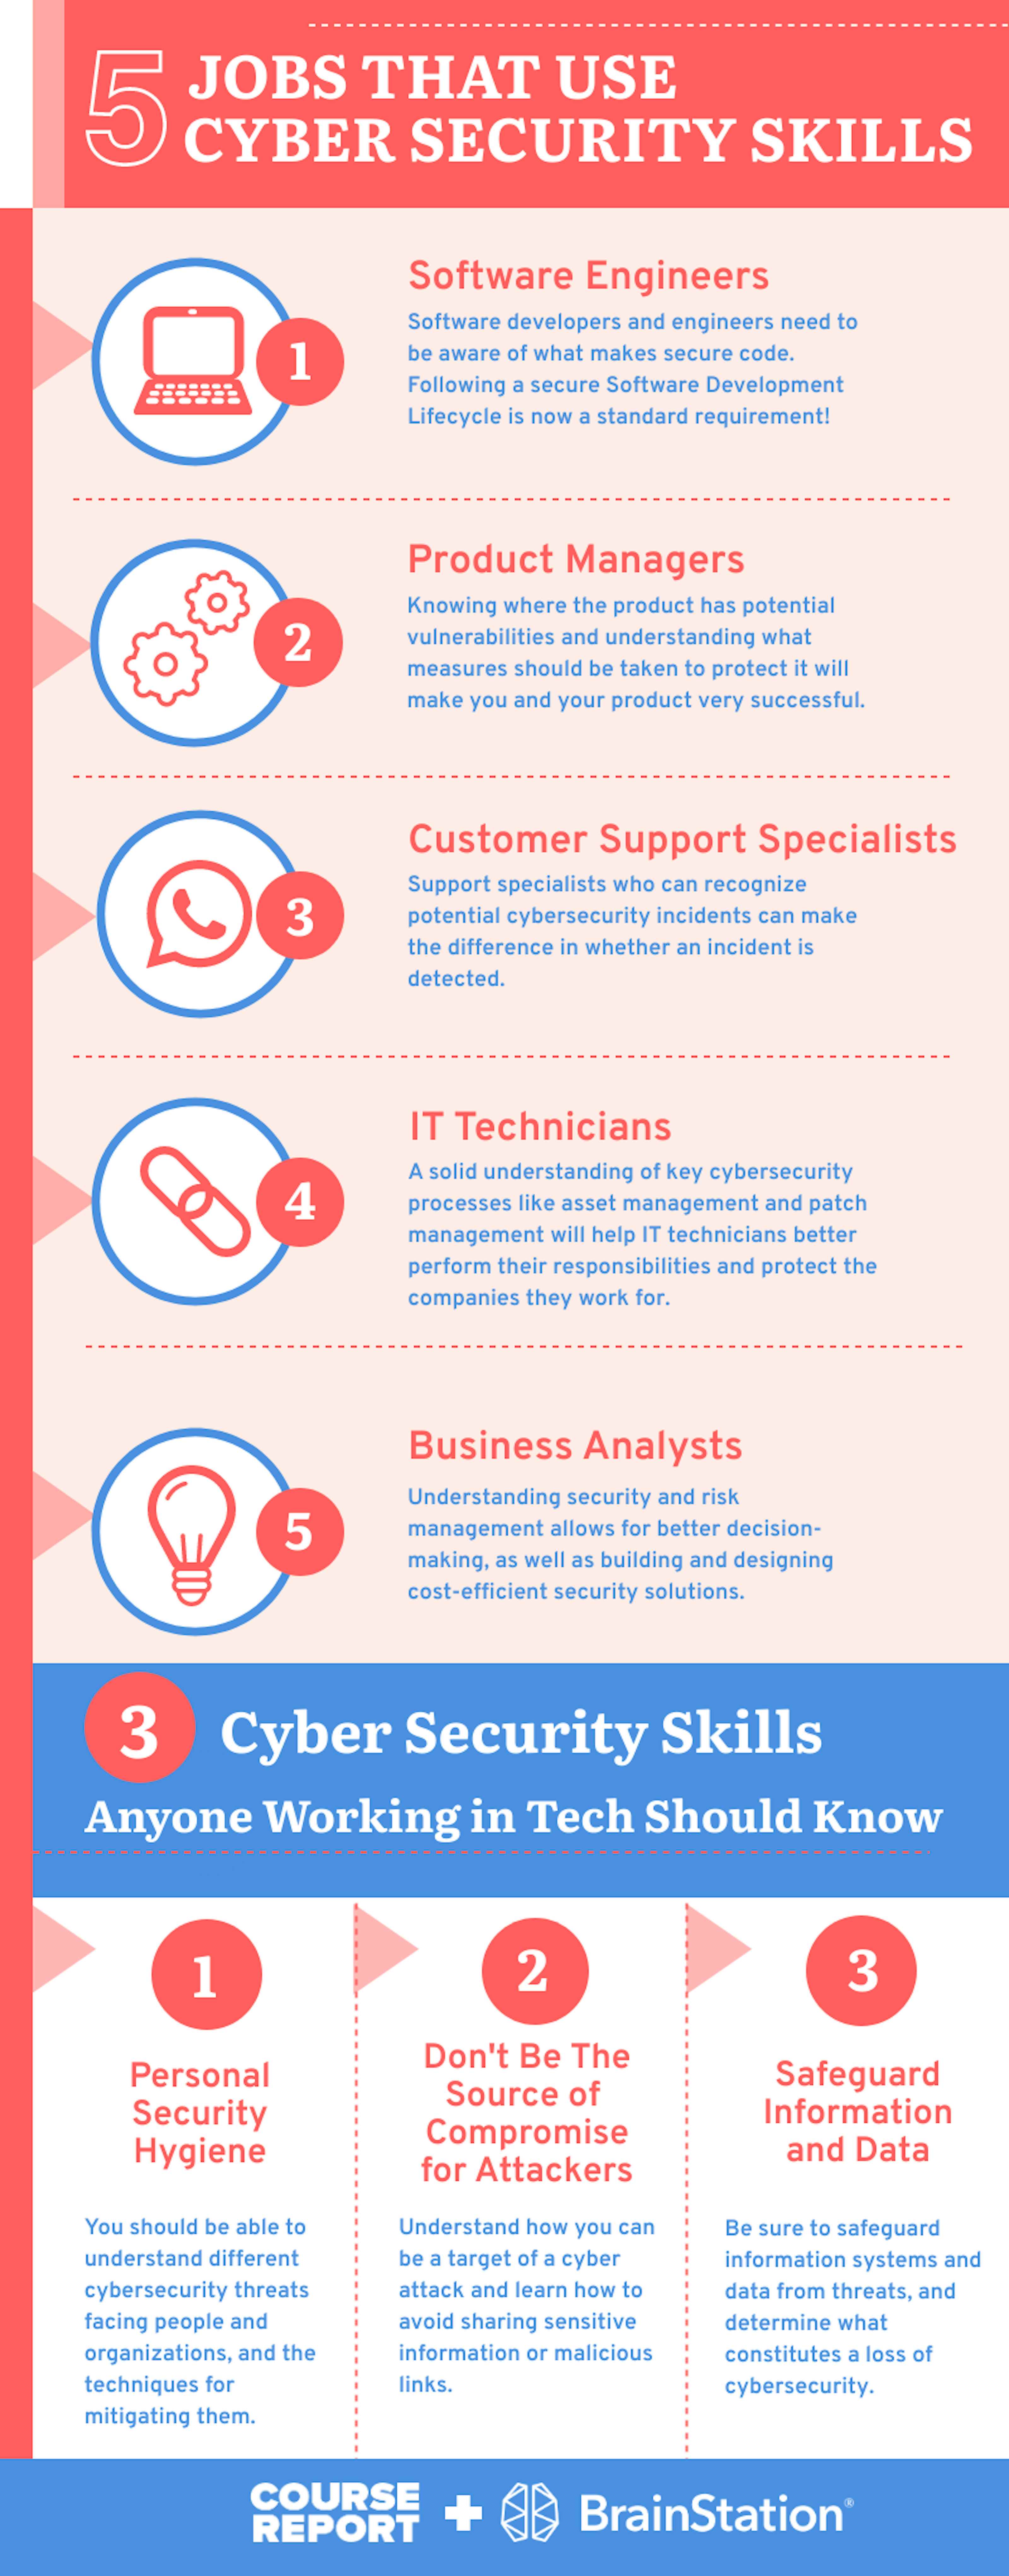 5 Jobs That Use Cyber Security Skills Course Report